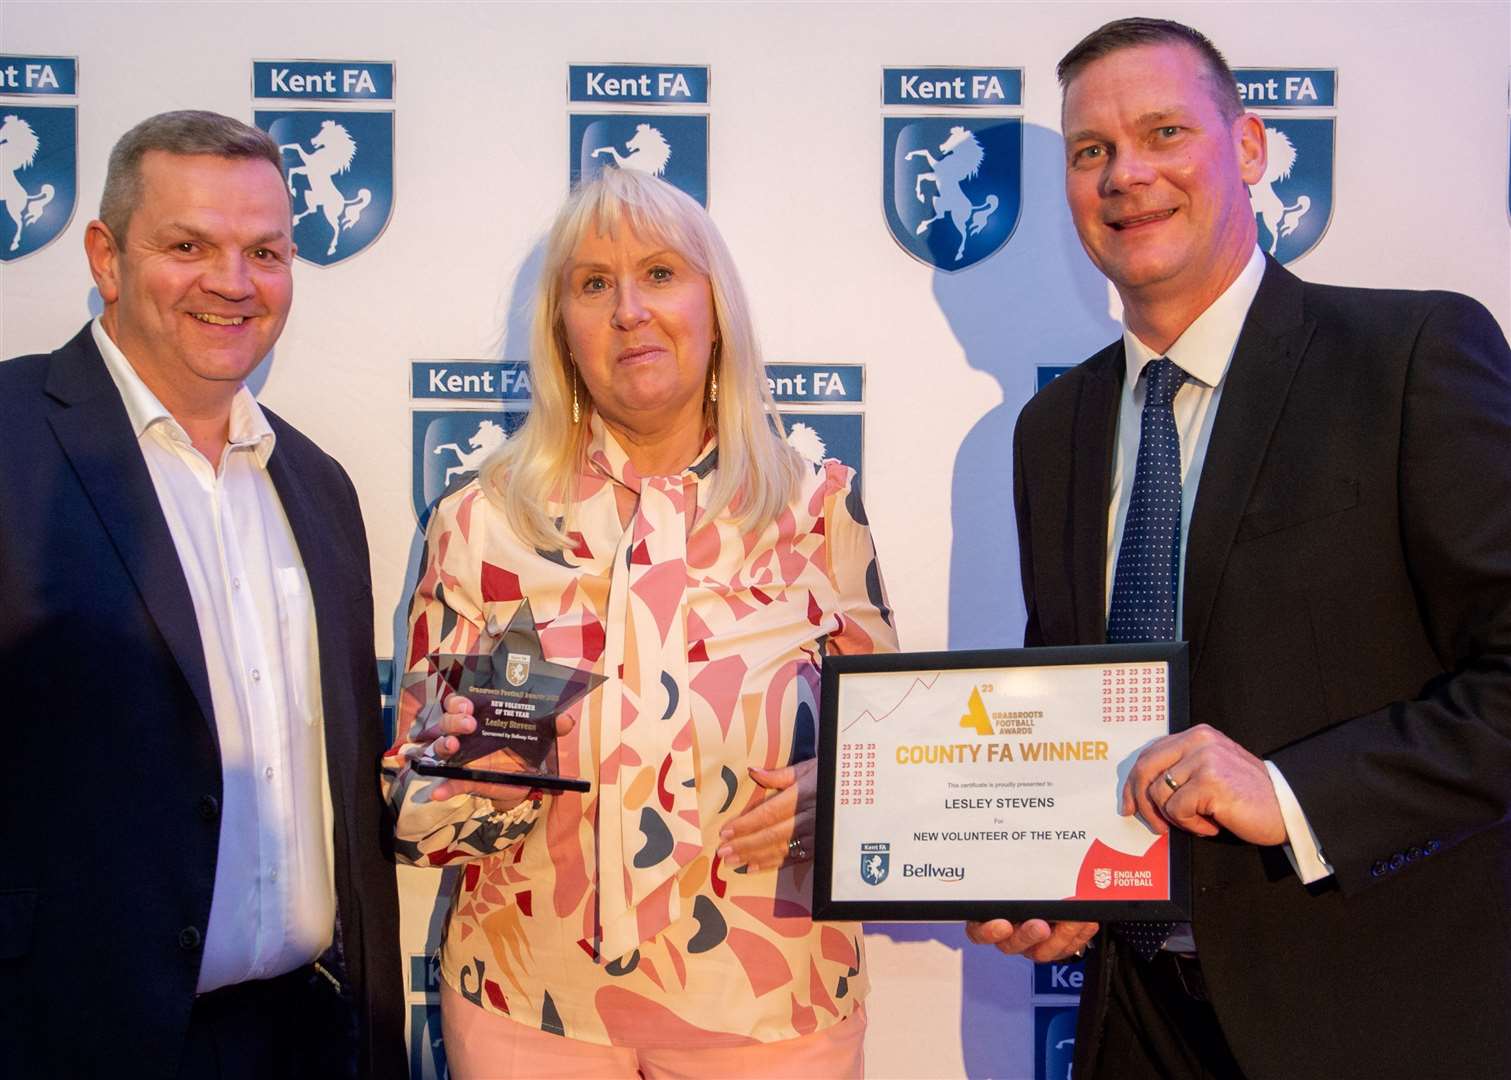 Kent FA New Volunteer of the Year Lesley Stevens, of Bearsted, is presented with her award. Her husband Kevin Stevens also won an award on the night but was unable to attend. Picture: Ian Scammell